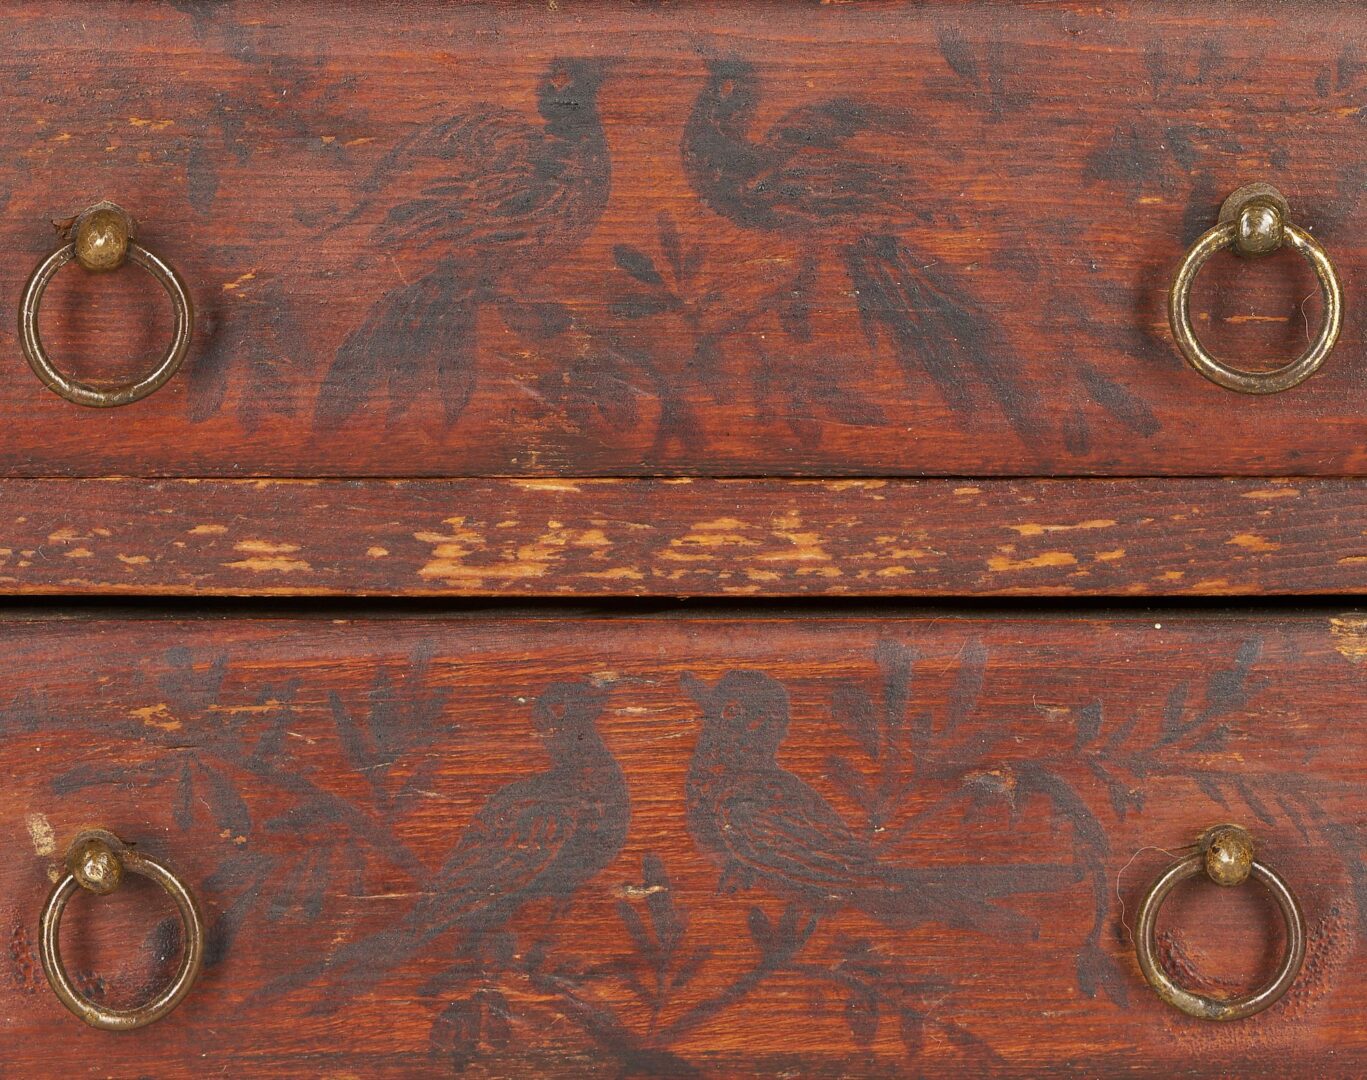 Lot 238: Miniature Painted Chest of Drawers, Bird and Foliate design